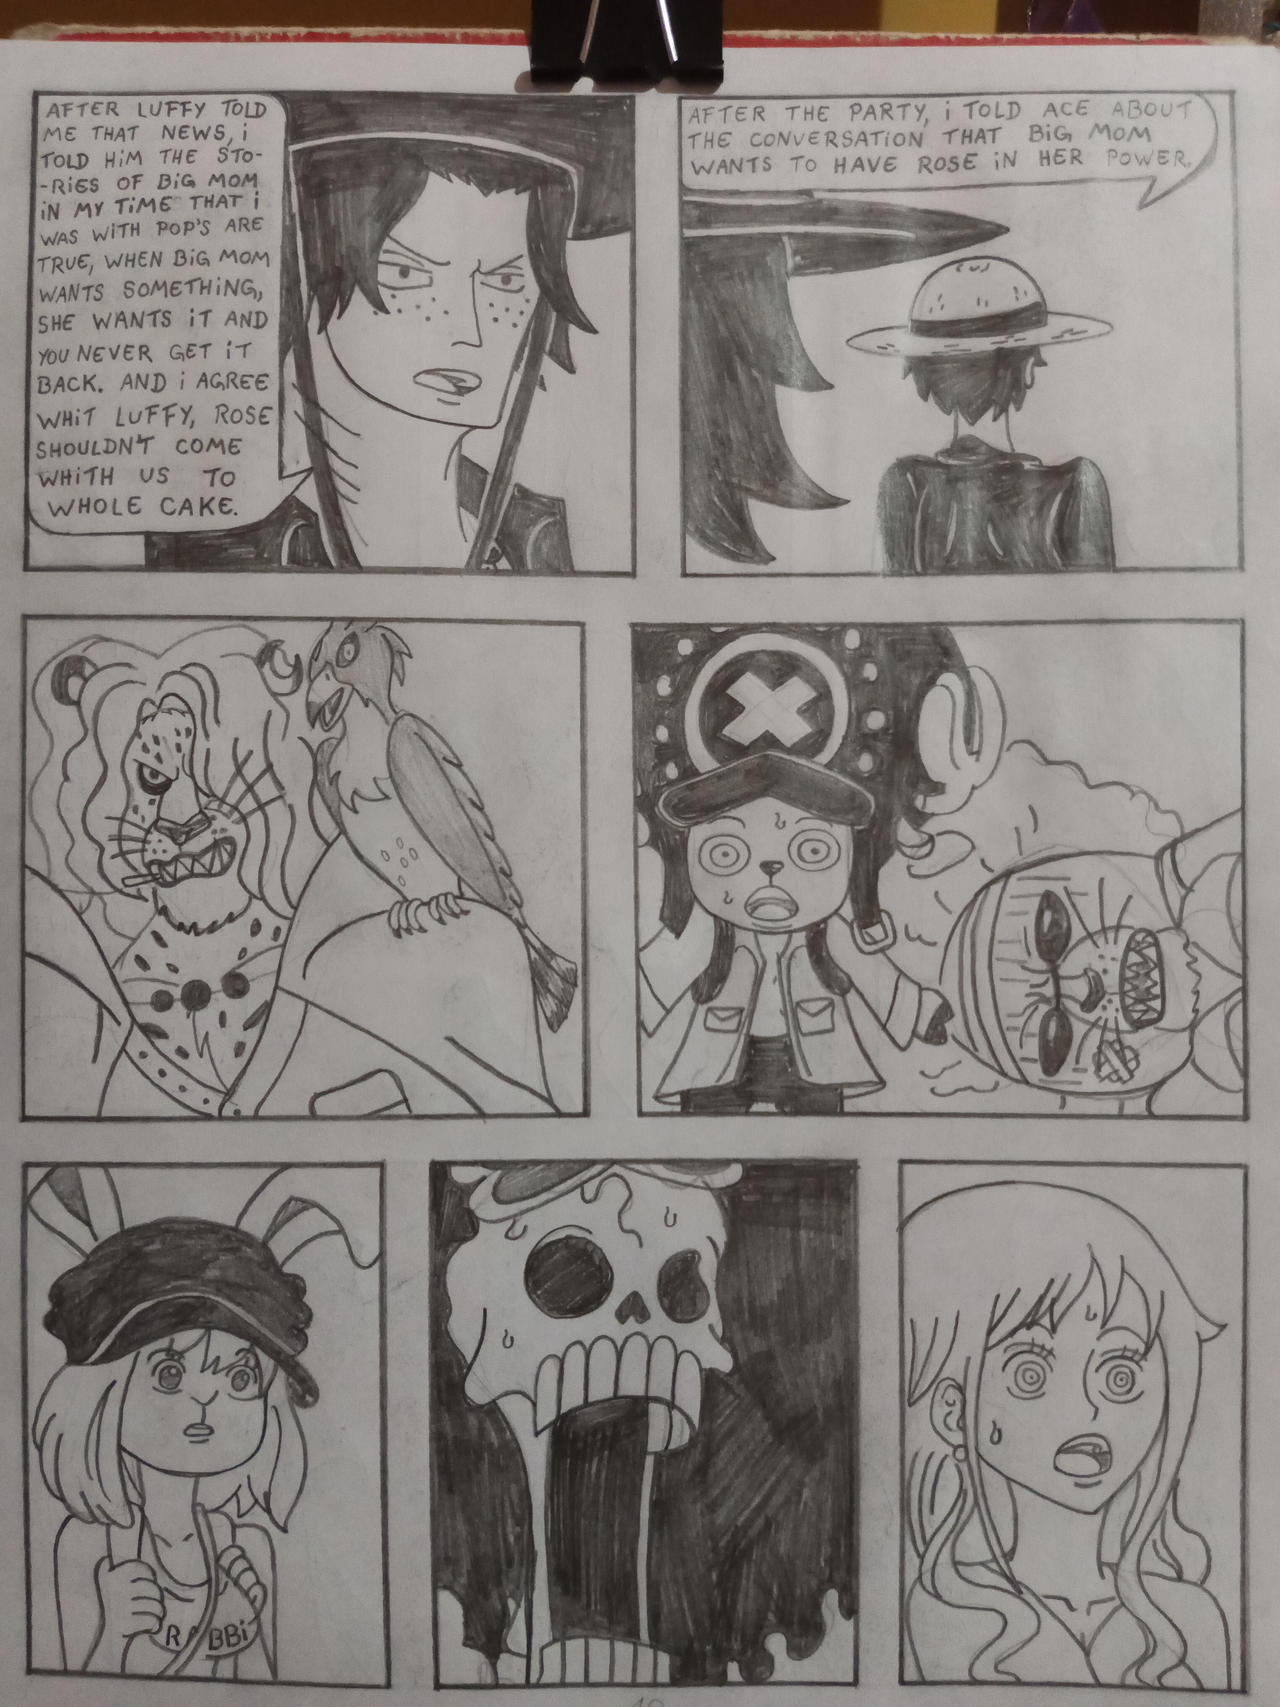 1061 spoiler] Do they look familiar? (That's just my excuse to draw them  together lol) : r/OnePiece